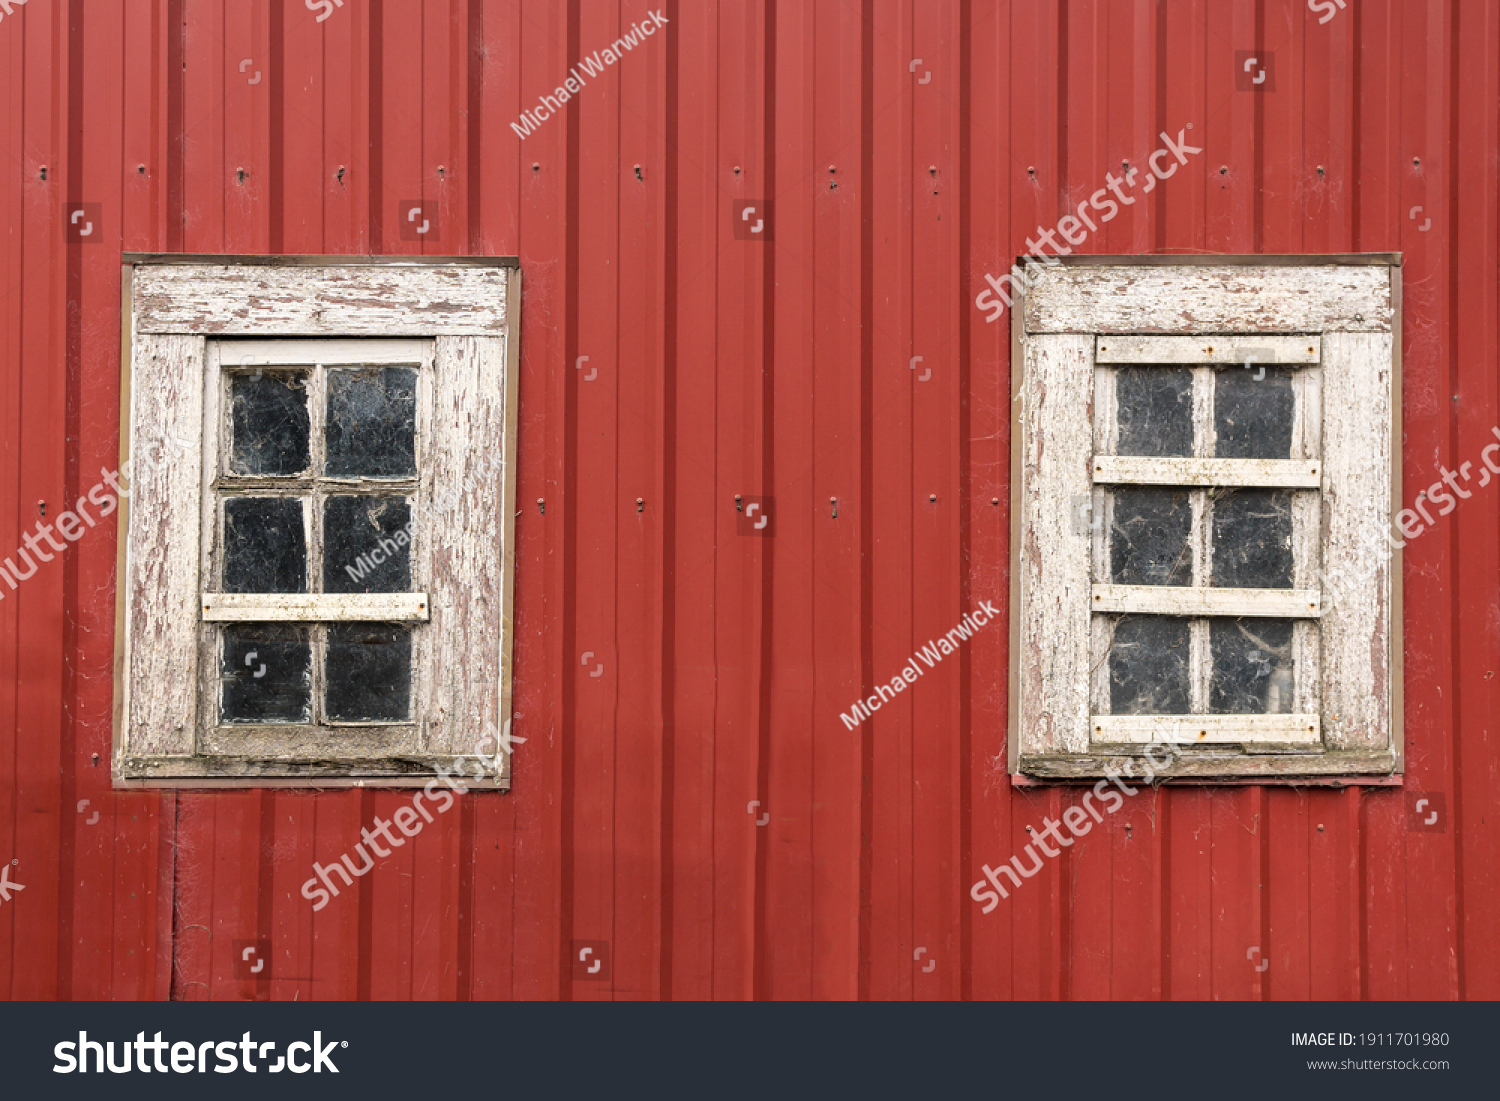 Old Red Barn with Two Weathered White Wooden Windows, Peeling Paint and Spider Webs. #1911701980